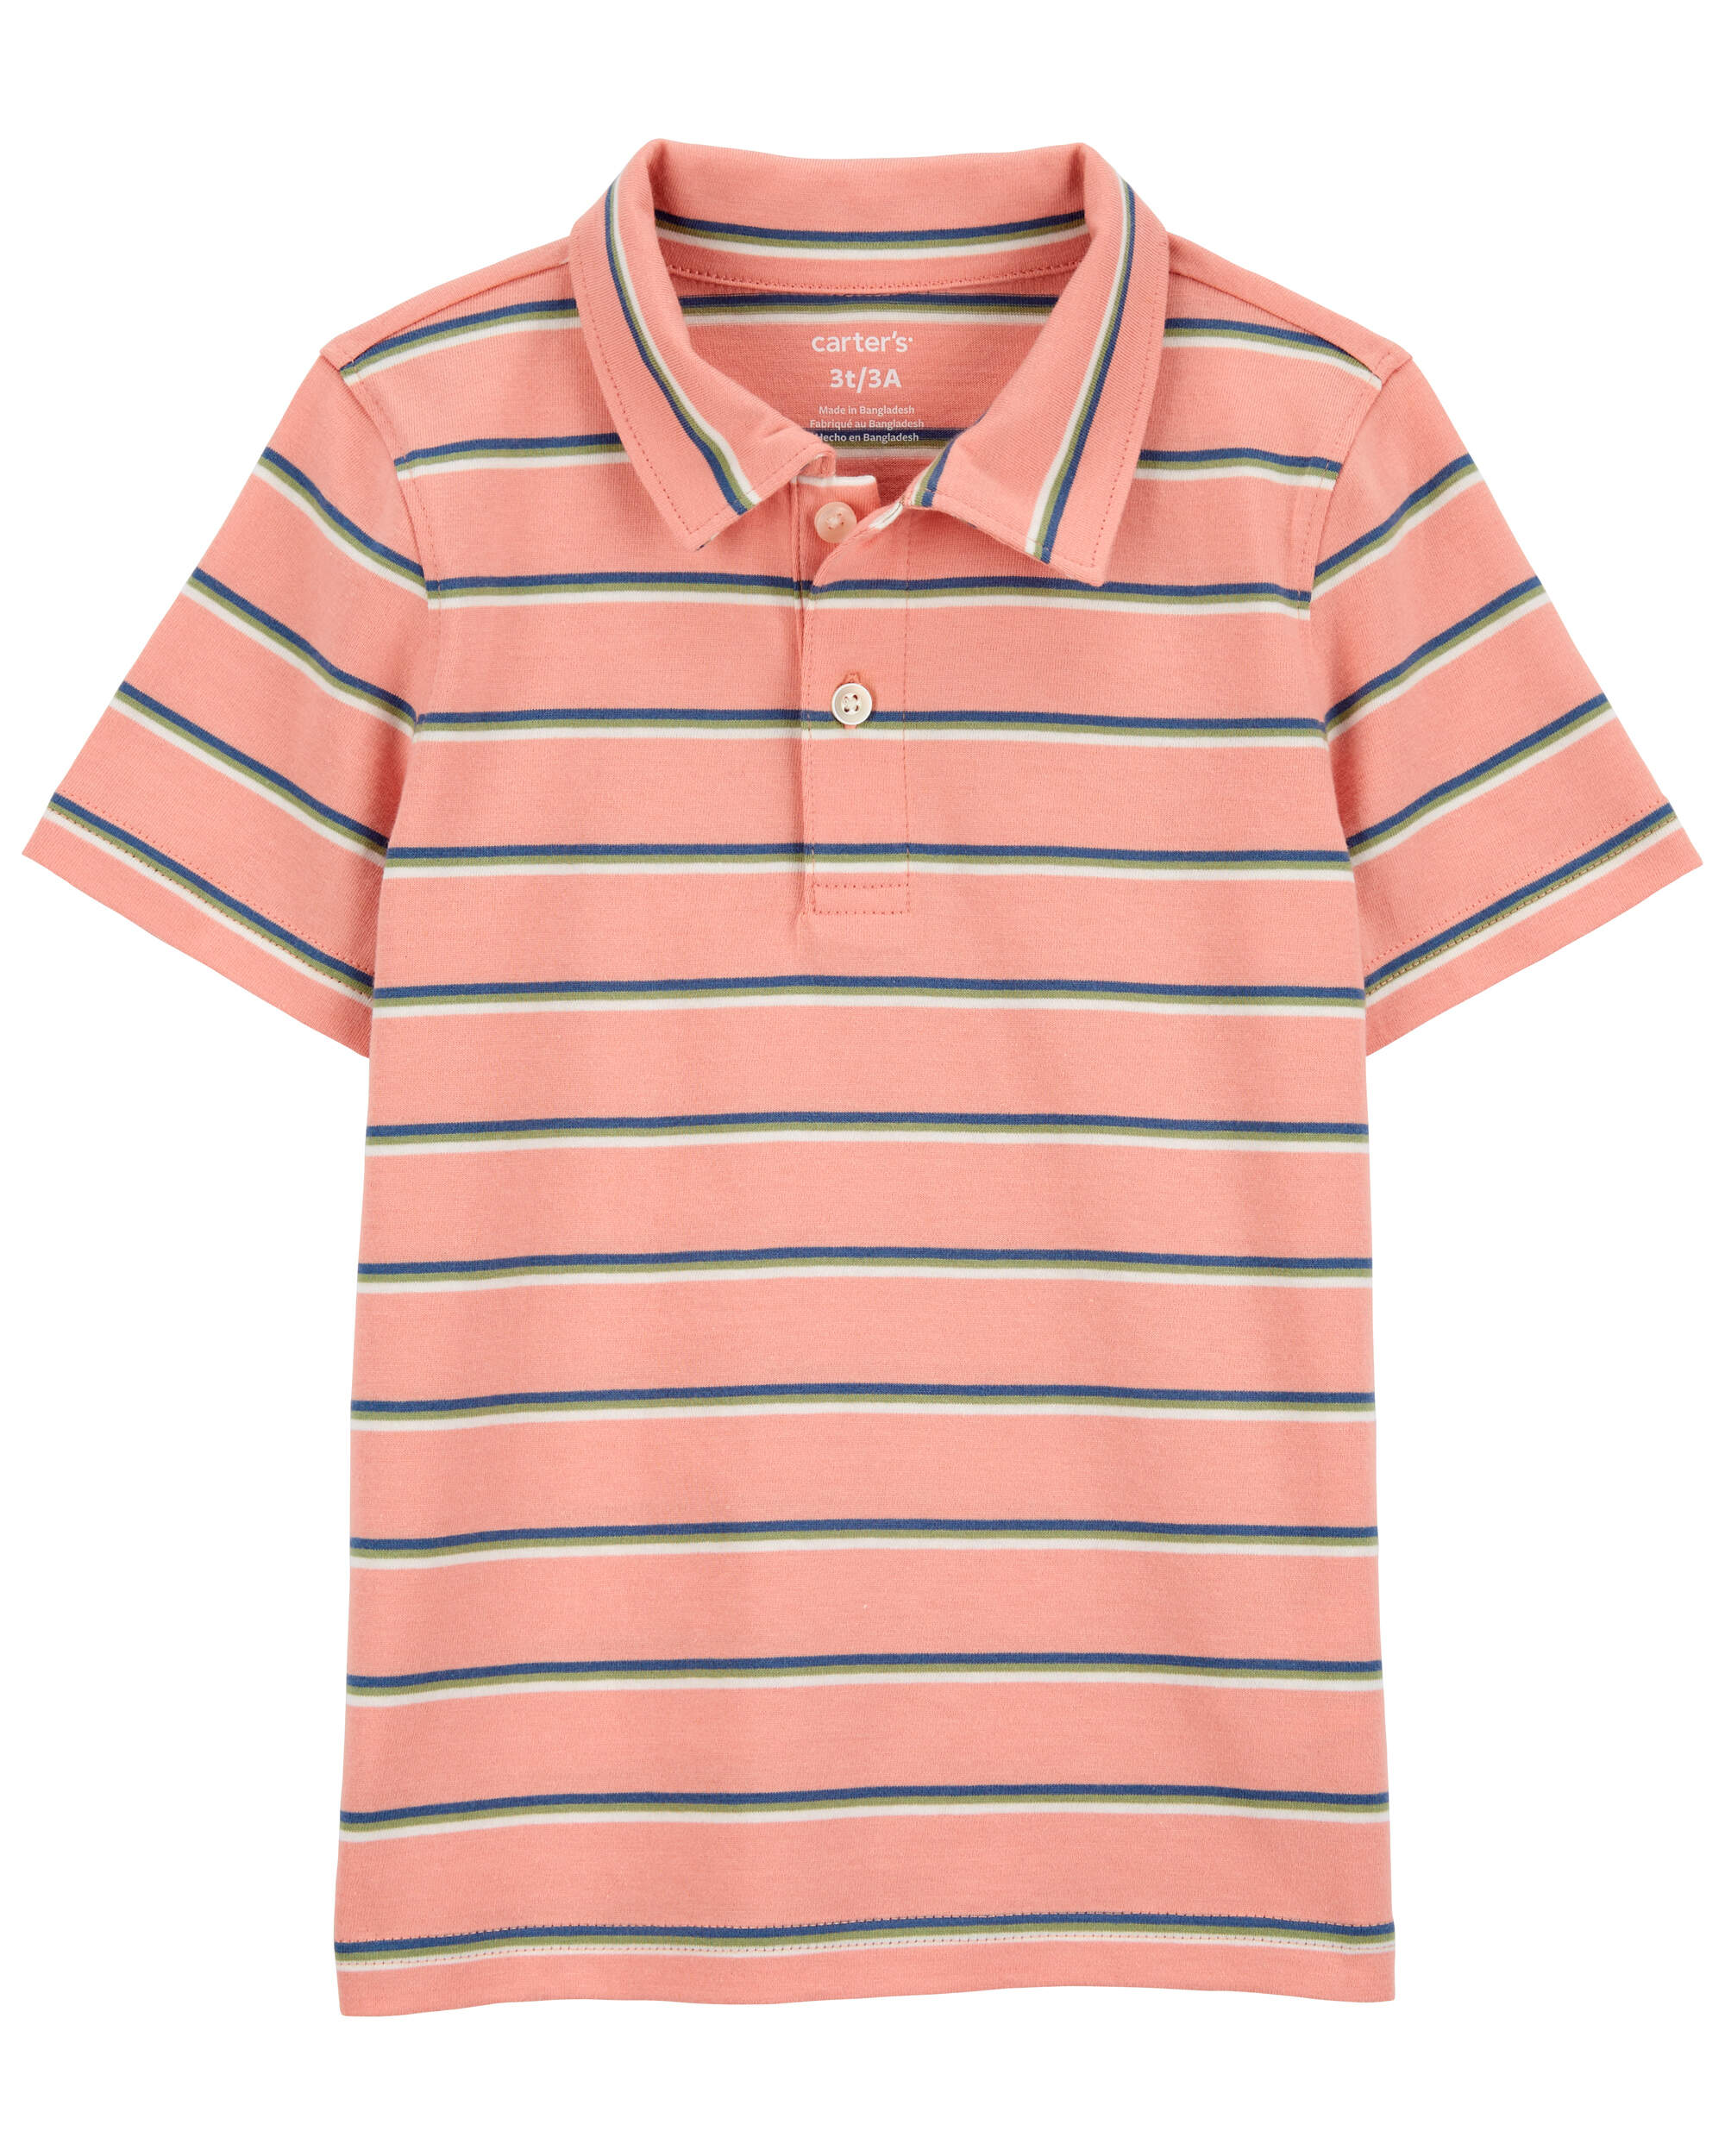 Toddler Striped Jersey Polo